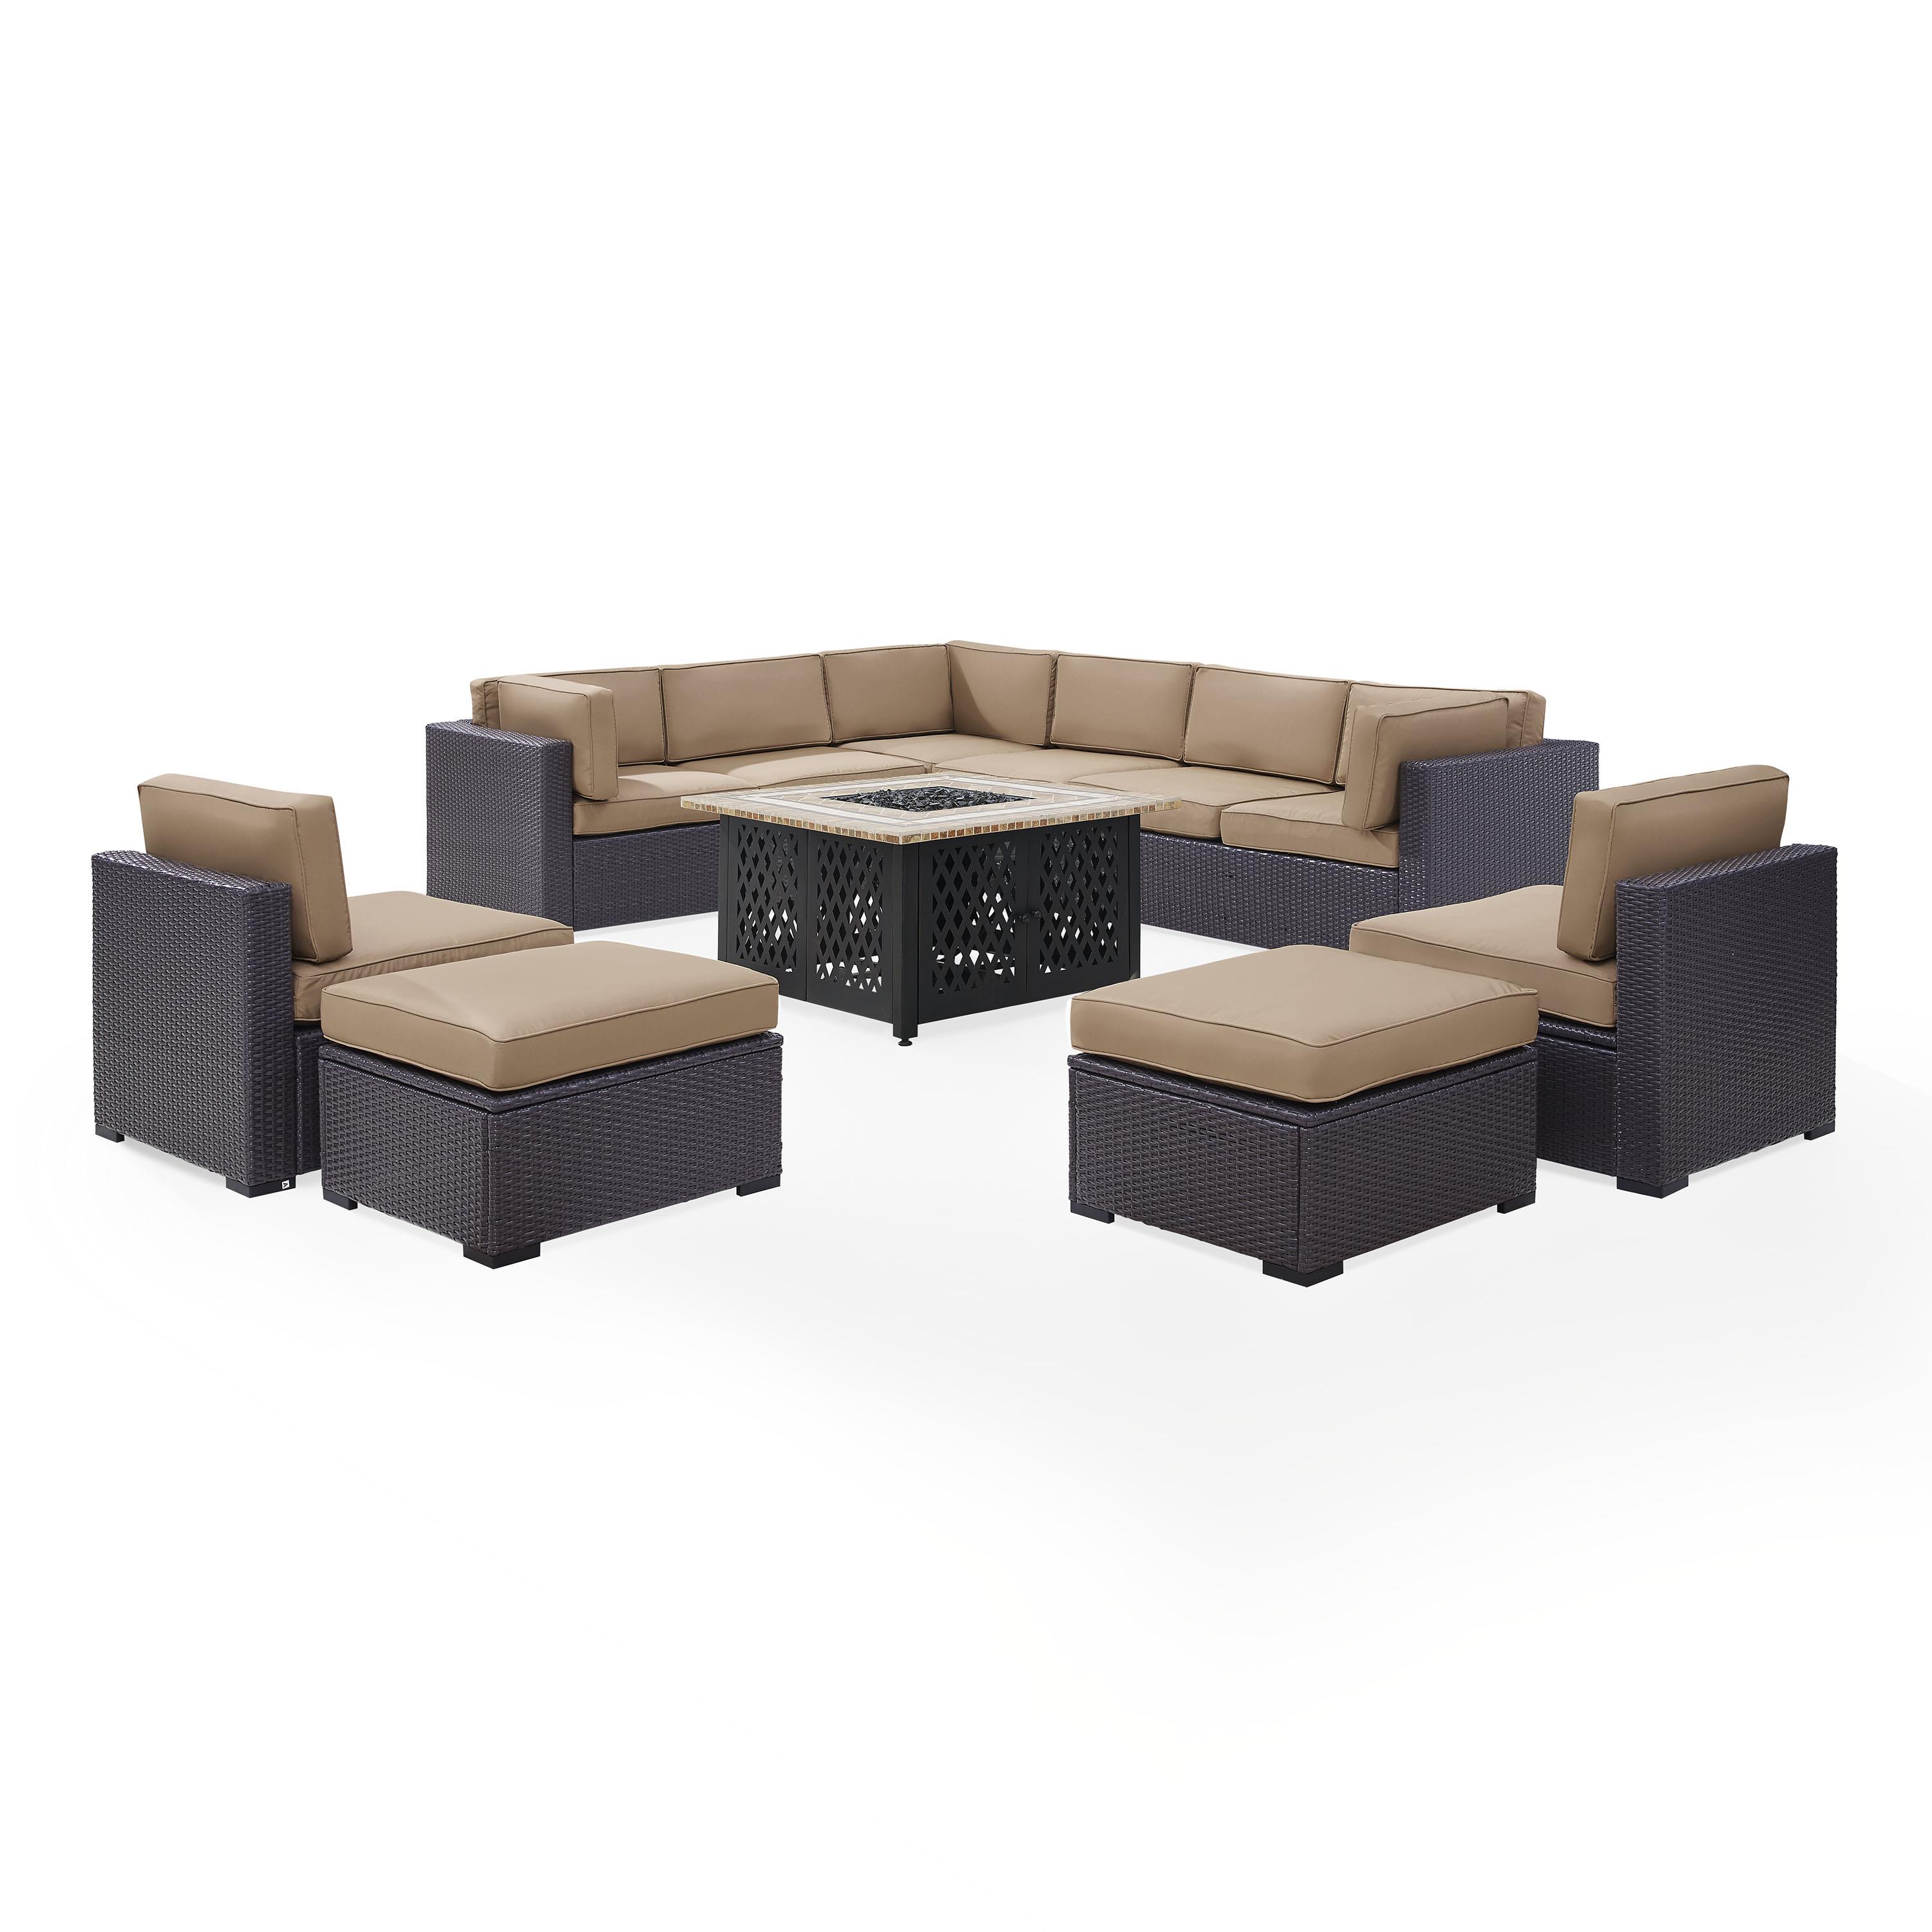 Crosley Furniture Biscayne 8 Piece Fabric Patio Fire Pit Sectional Set in Mocha - image 2 of 4